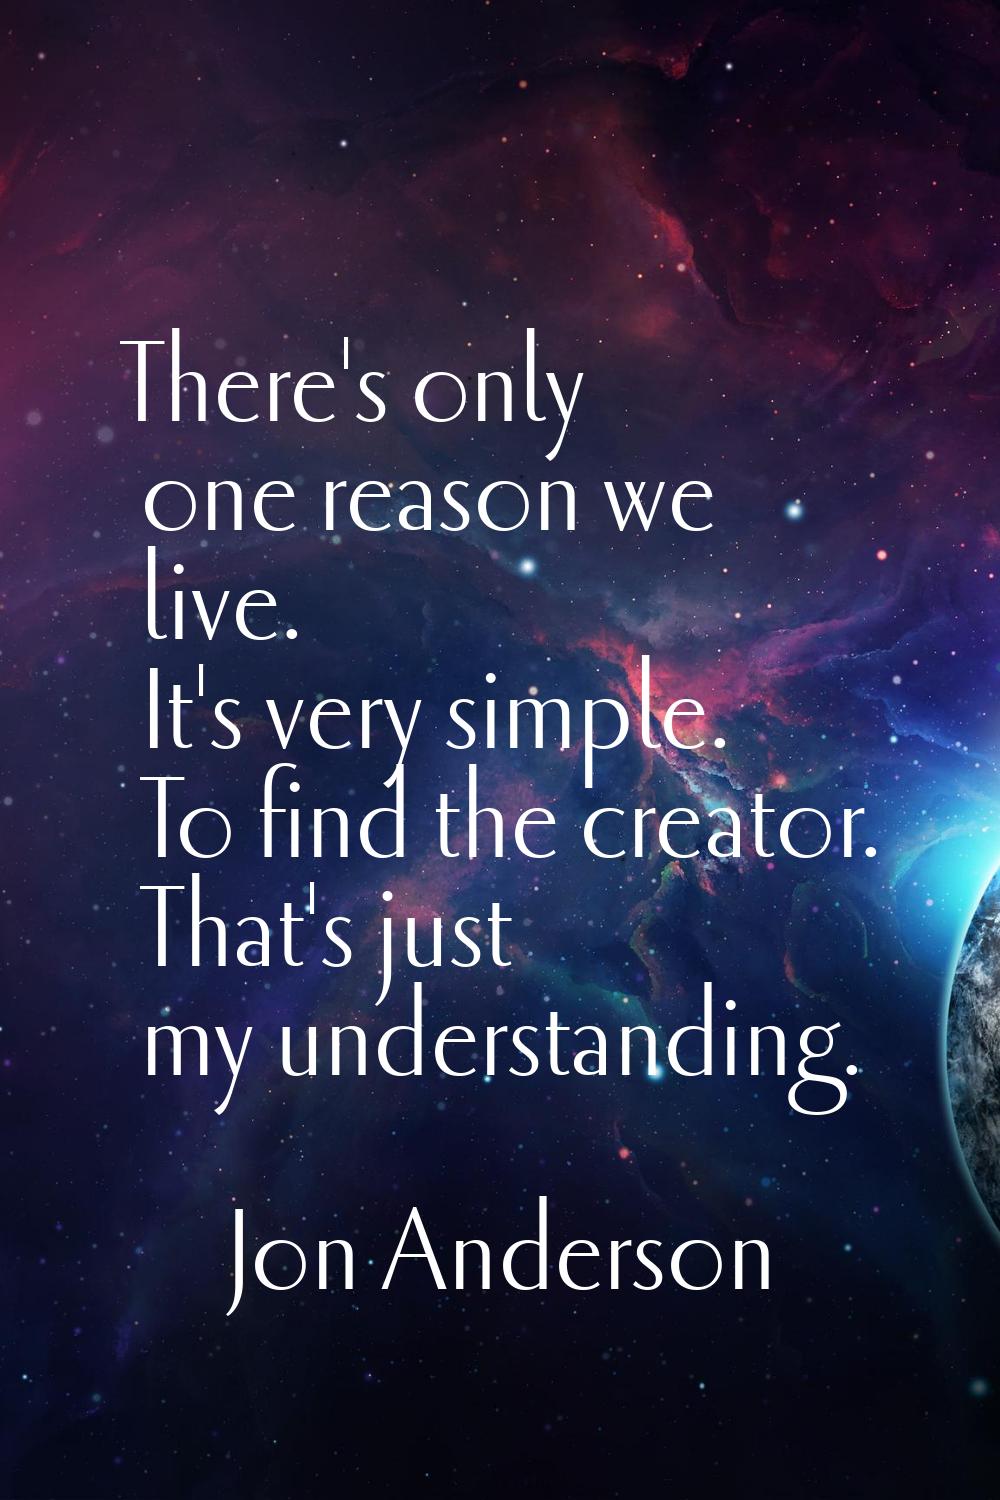 There's only one reason we live. It's very simple. To find the creator. That's just my understandin